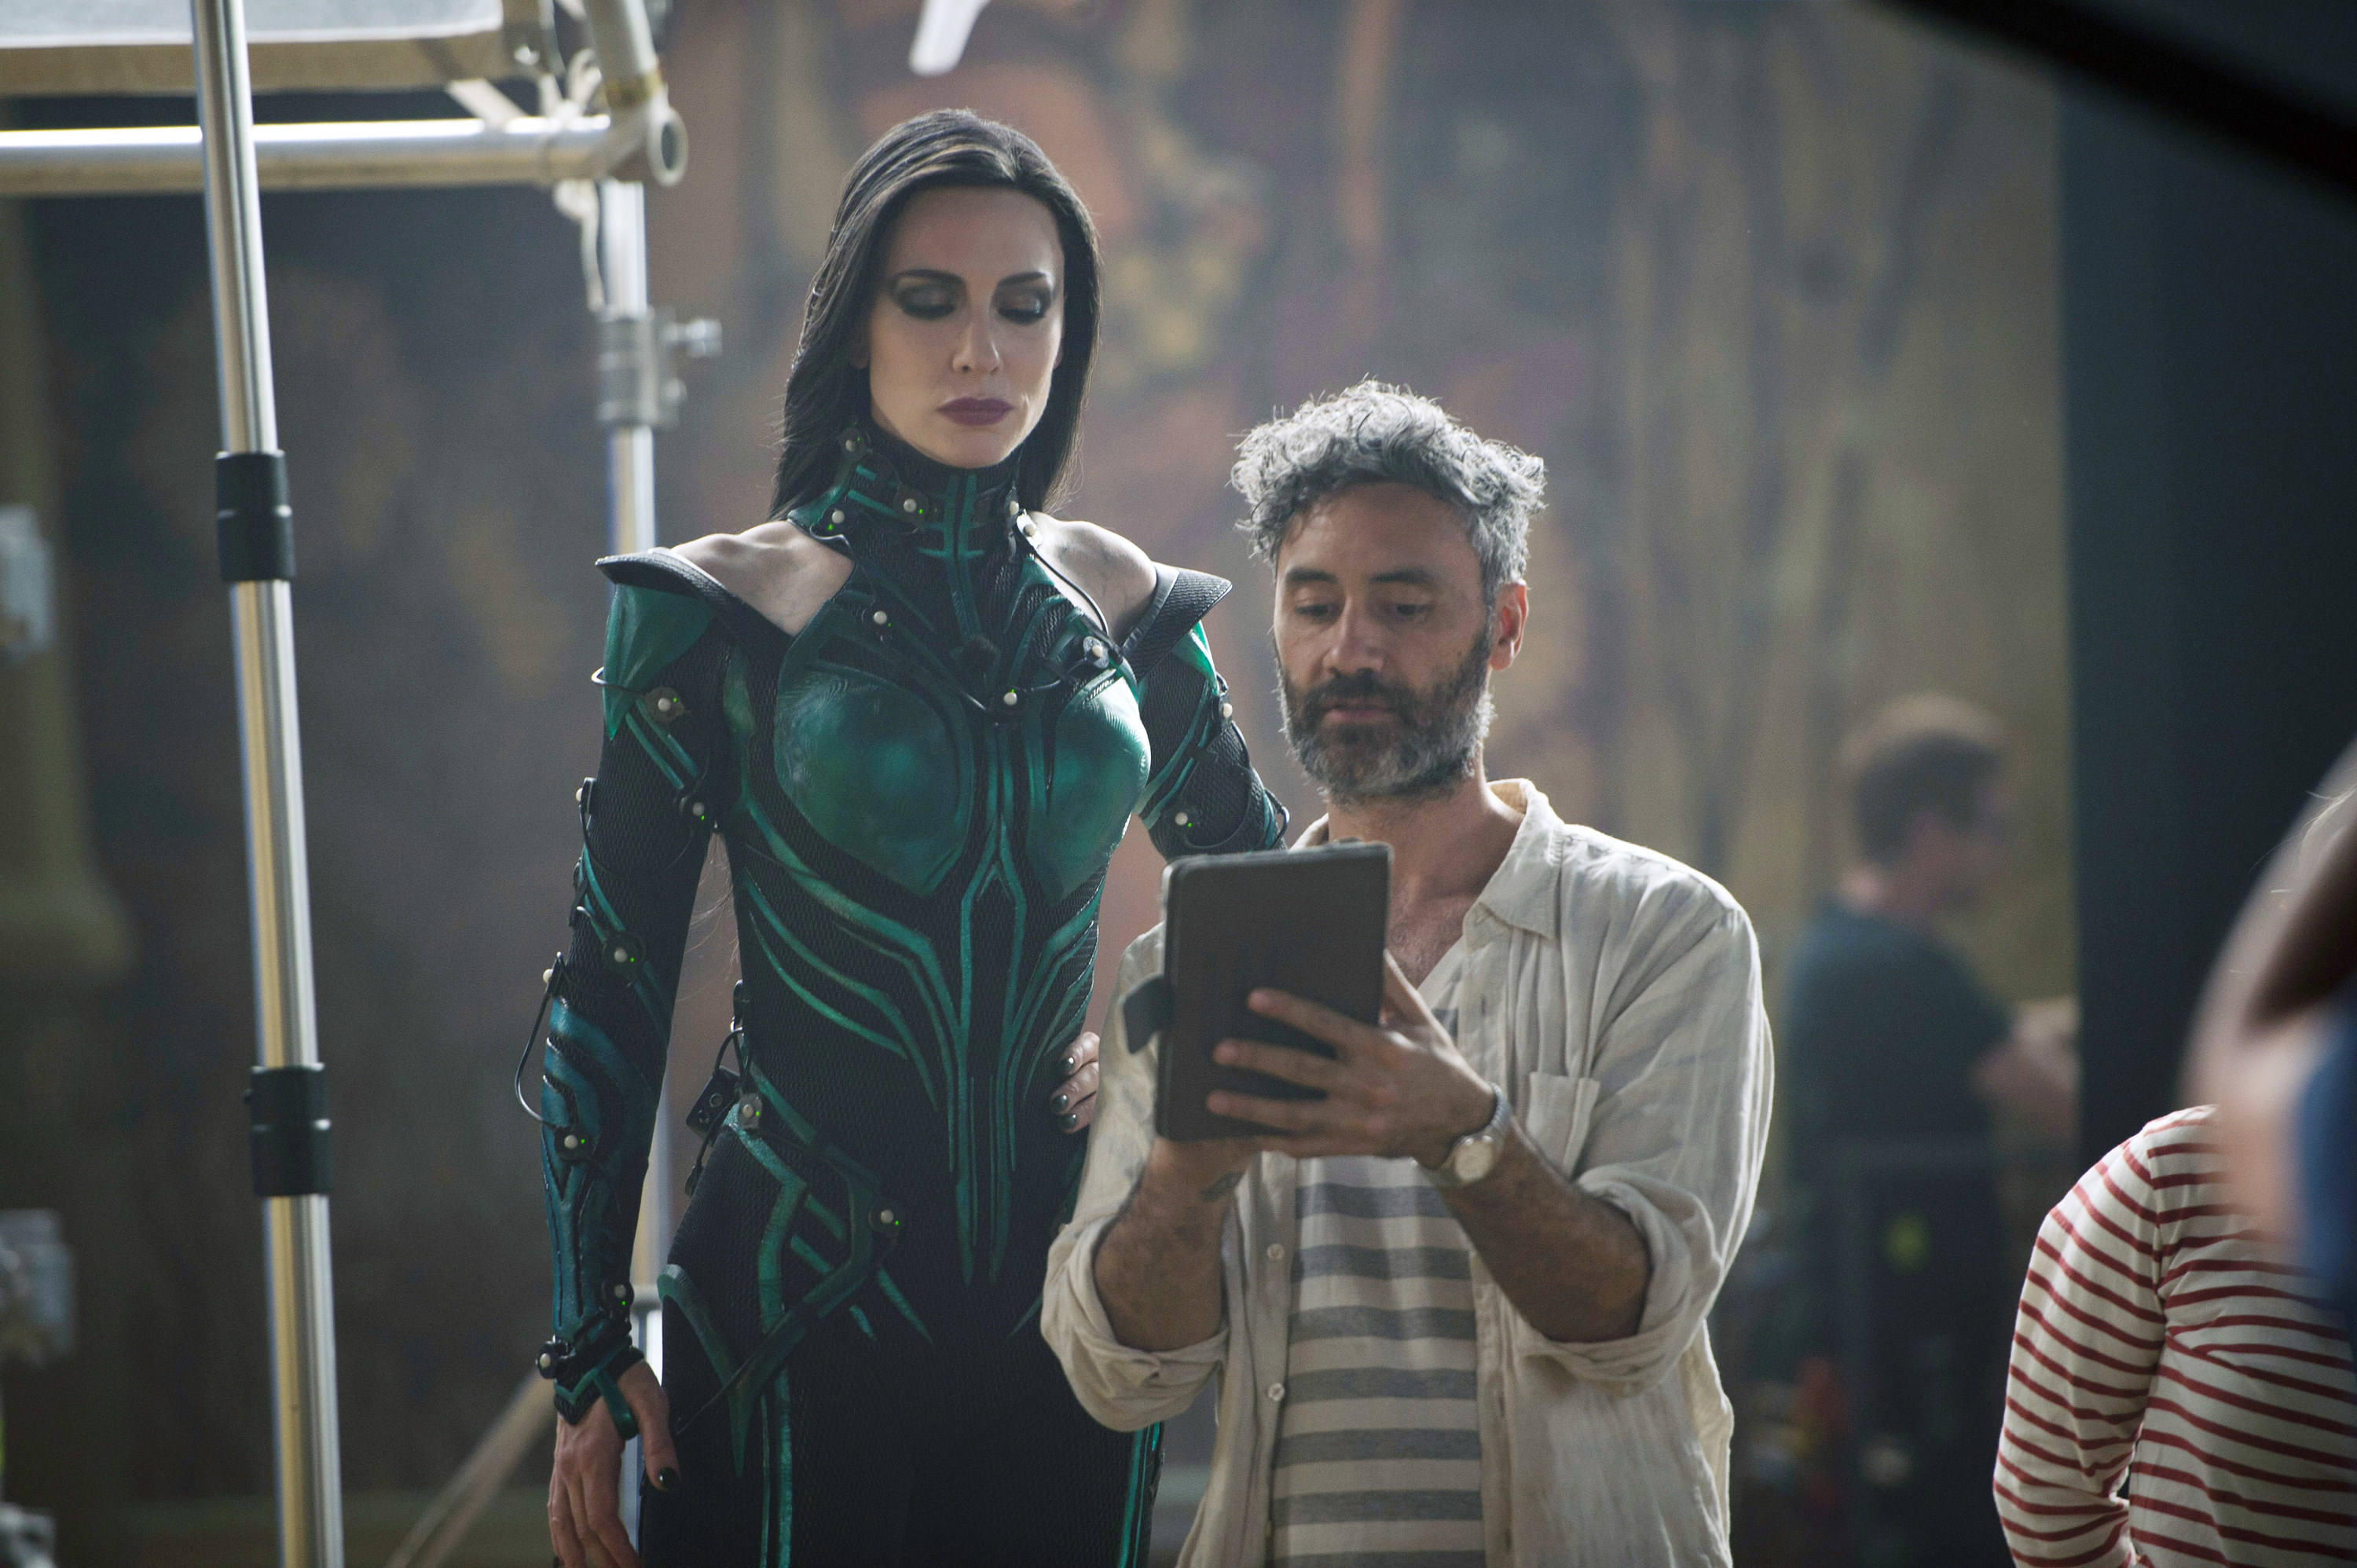 Cate Blanchett looking at a ipad that director Taika Waititi shows her on set